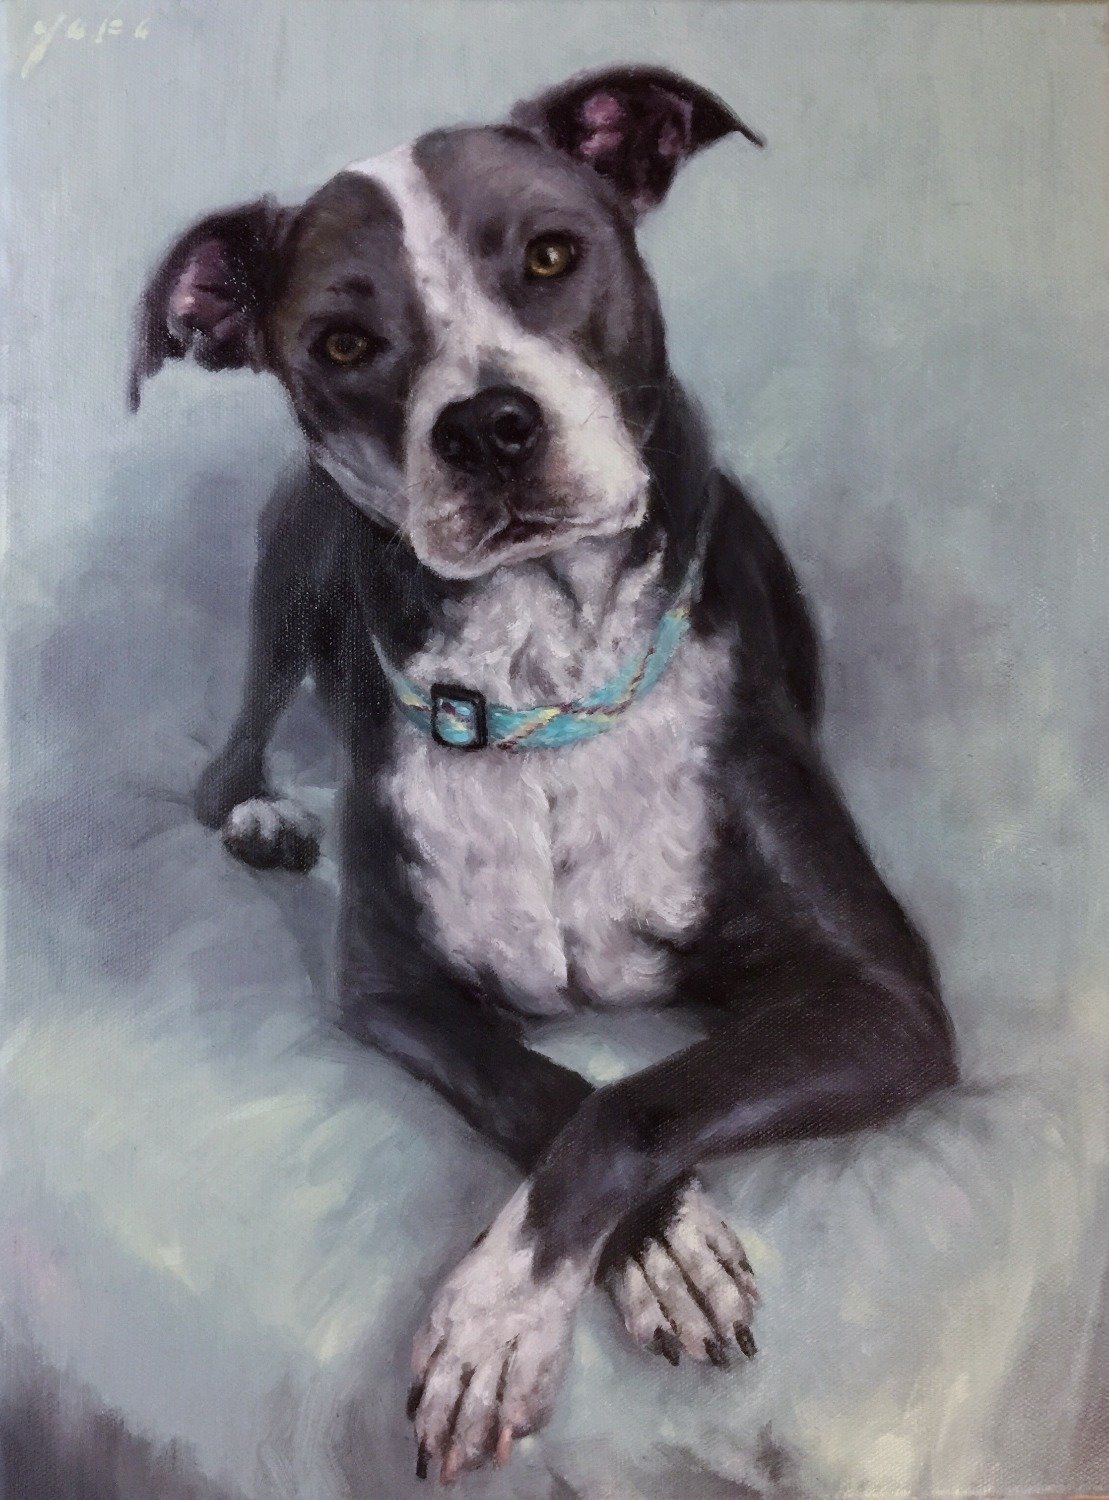 Pet Custom Oil Portrait Painting 12x16 inch from